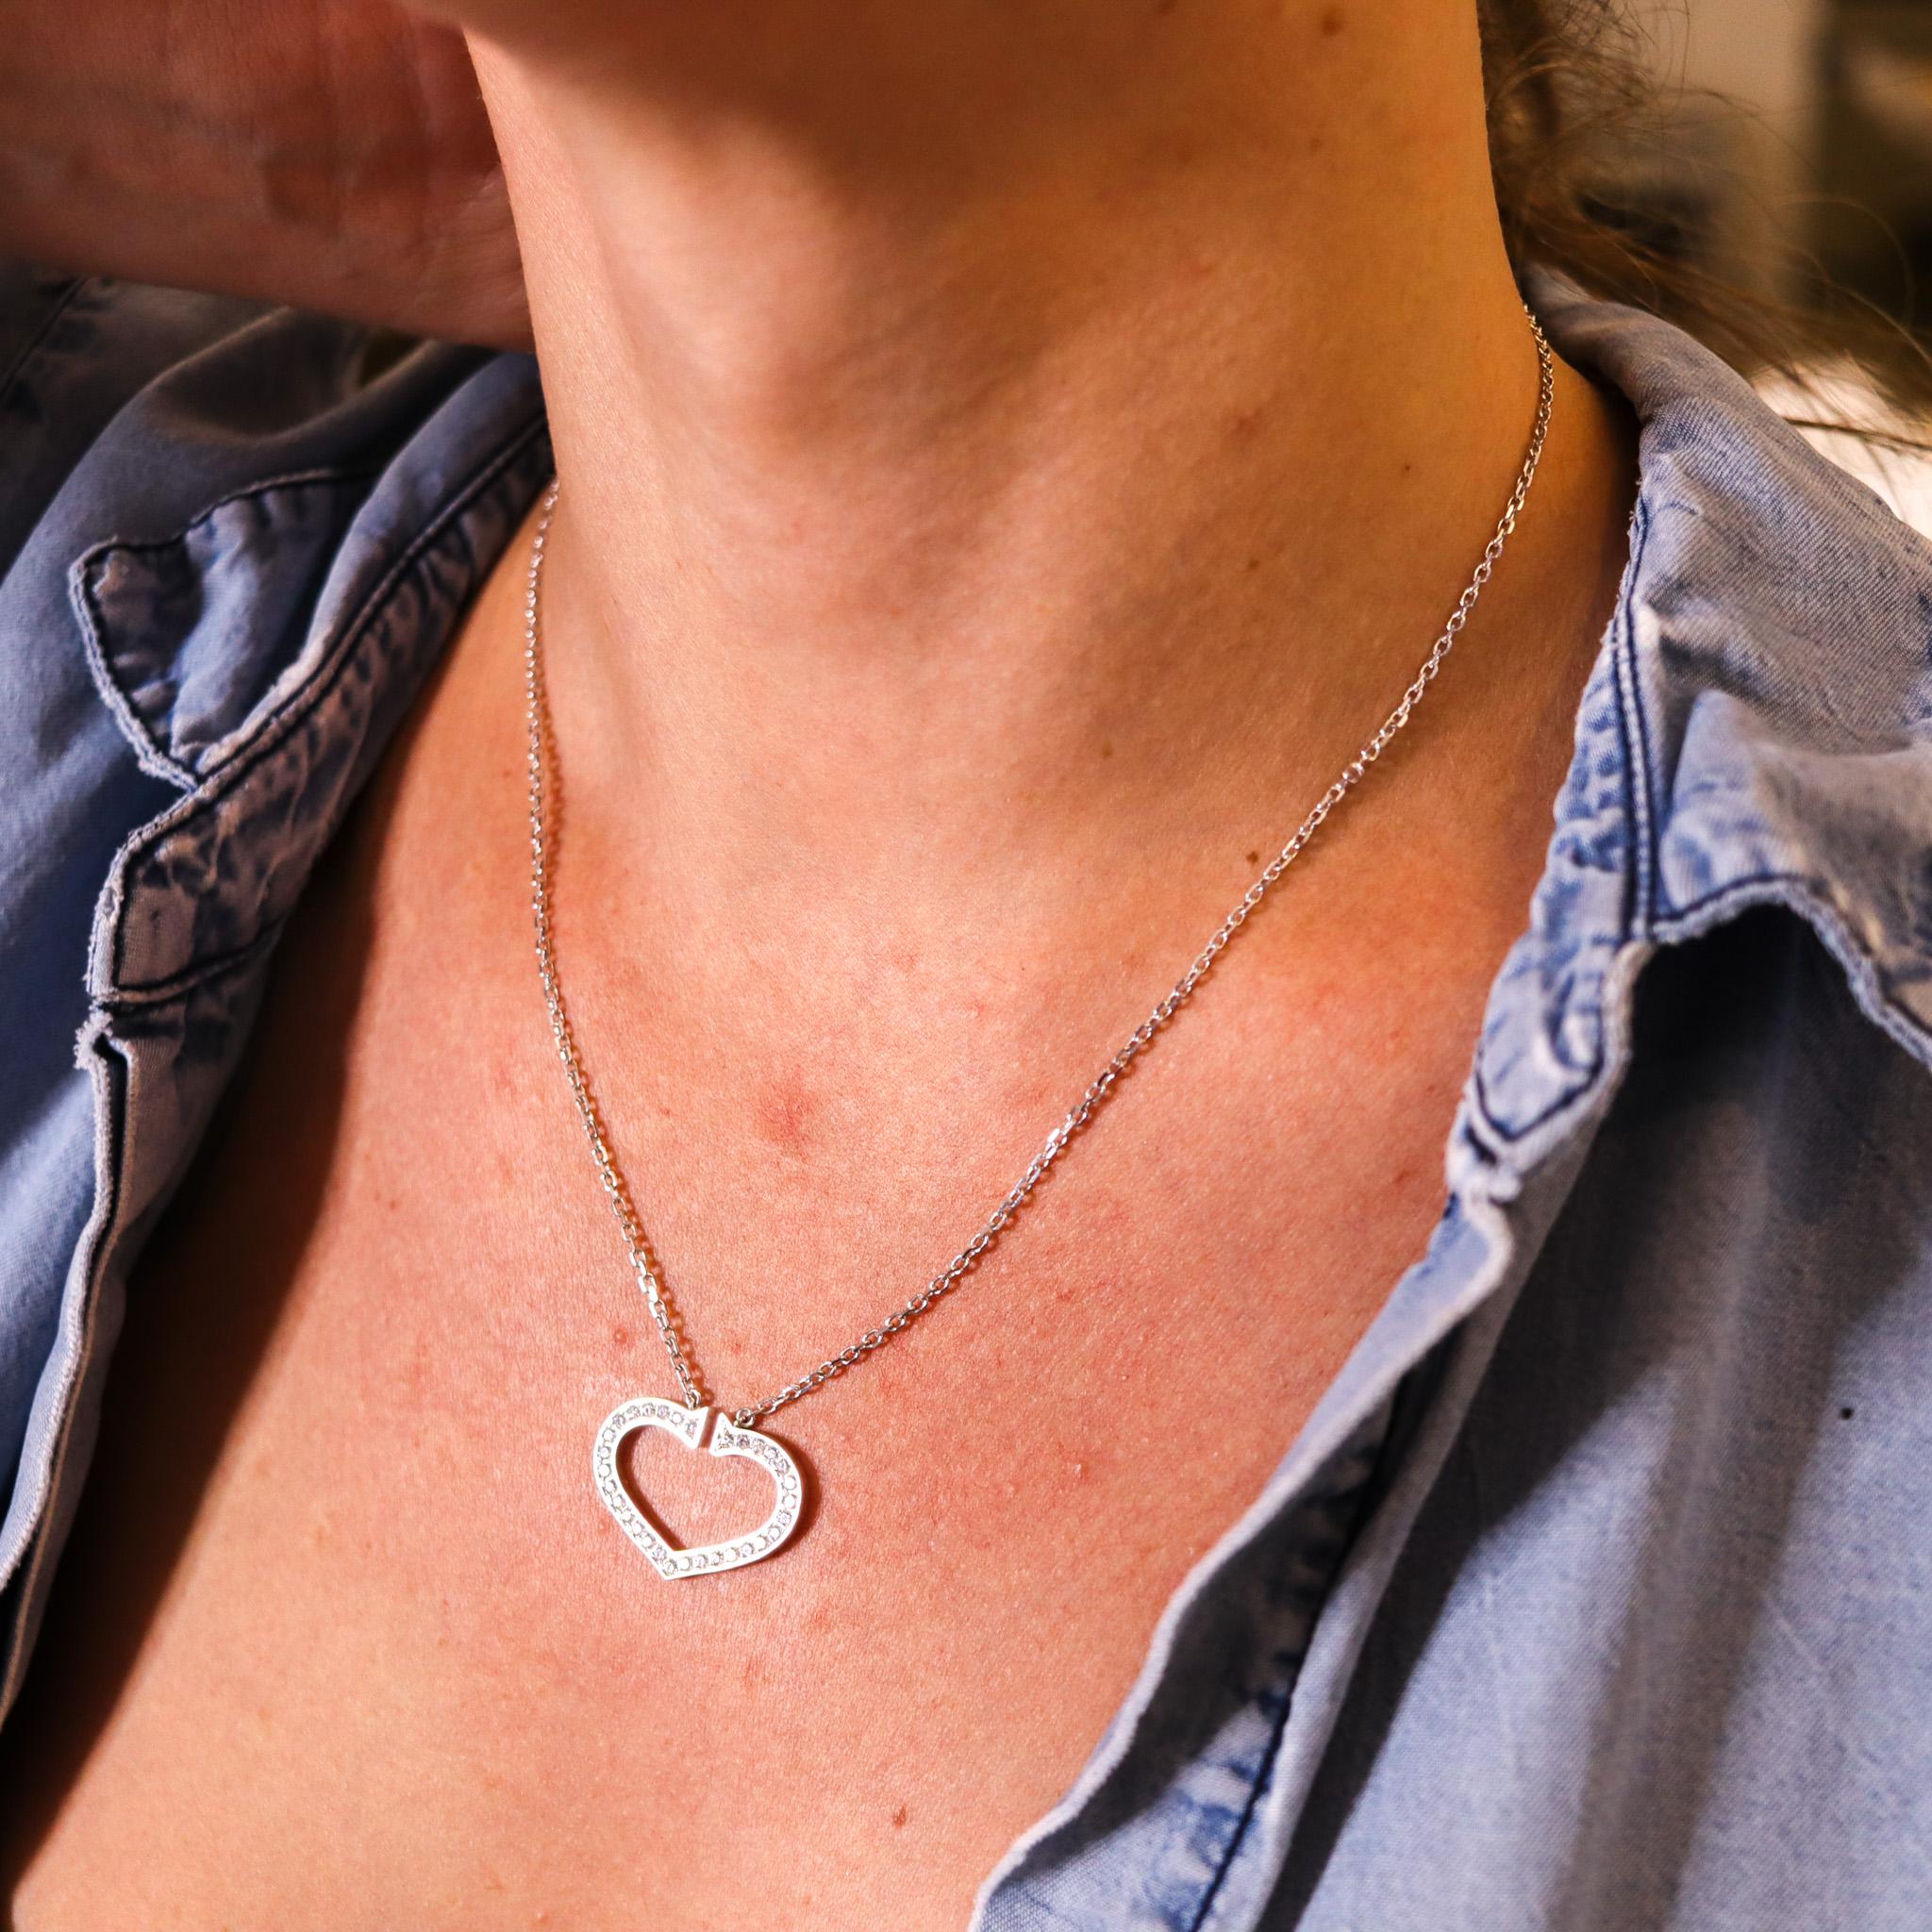 Cartier C Heart Necklace In 18Kt White Gold With 1.55 Ctw In VVS Diamonds 2